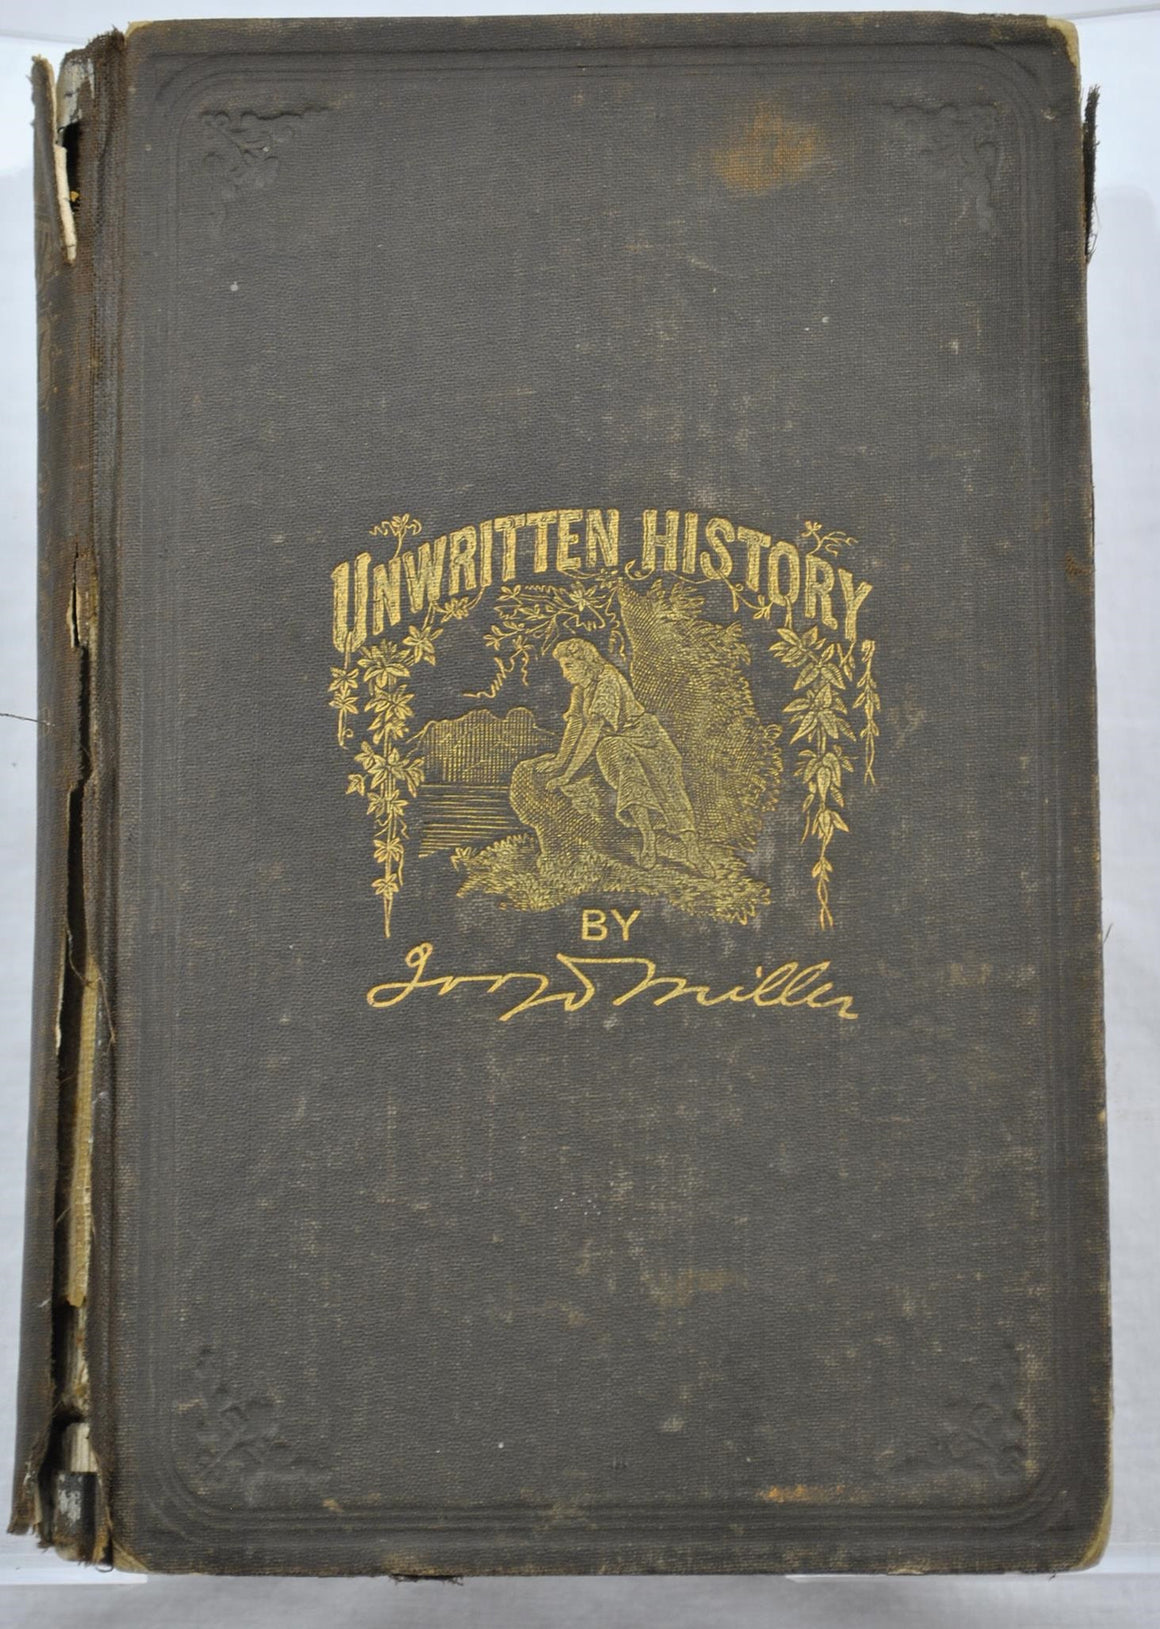 Unwritten History, Life Among the Modocs by Joaquin Miller 1874